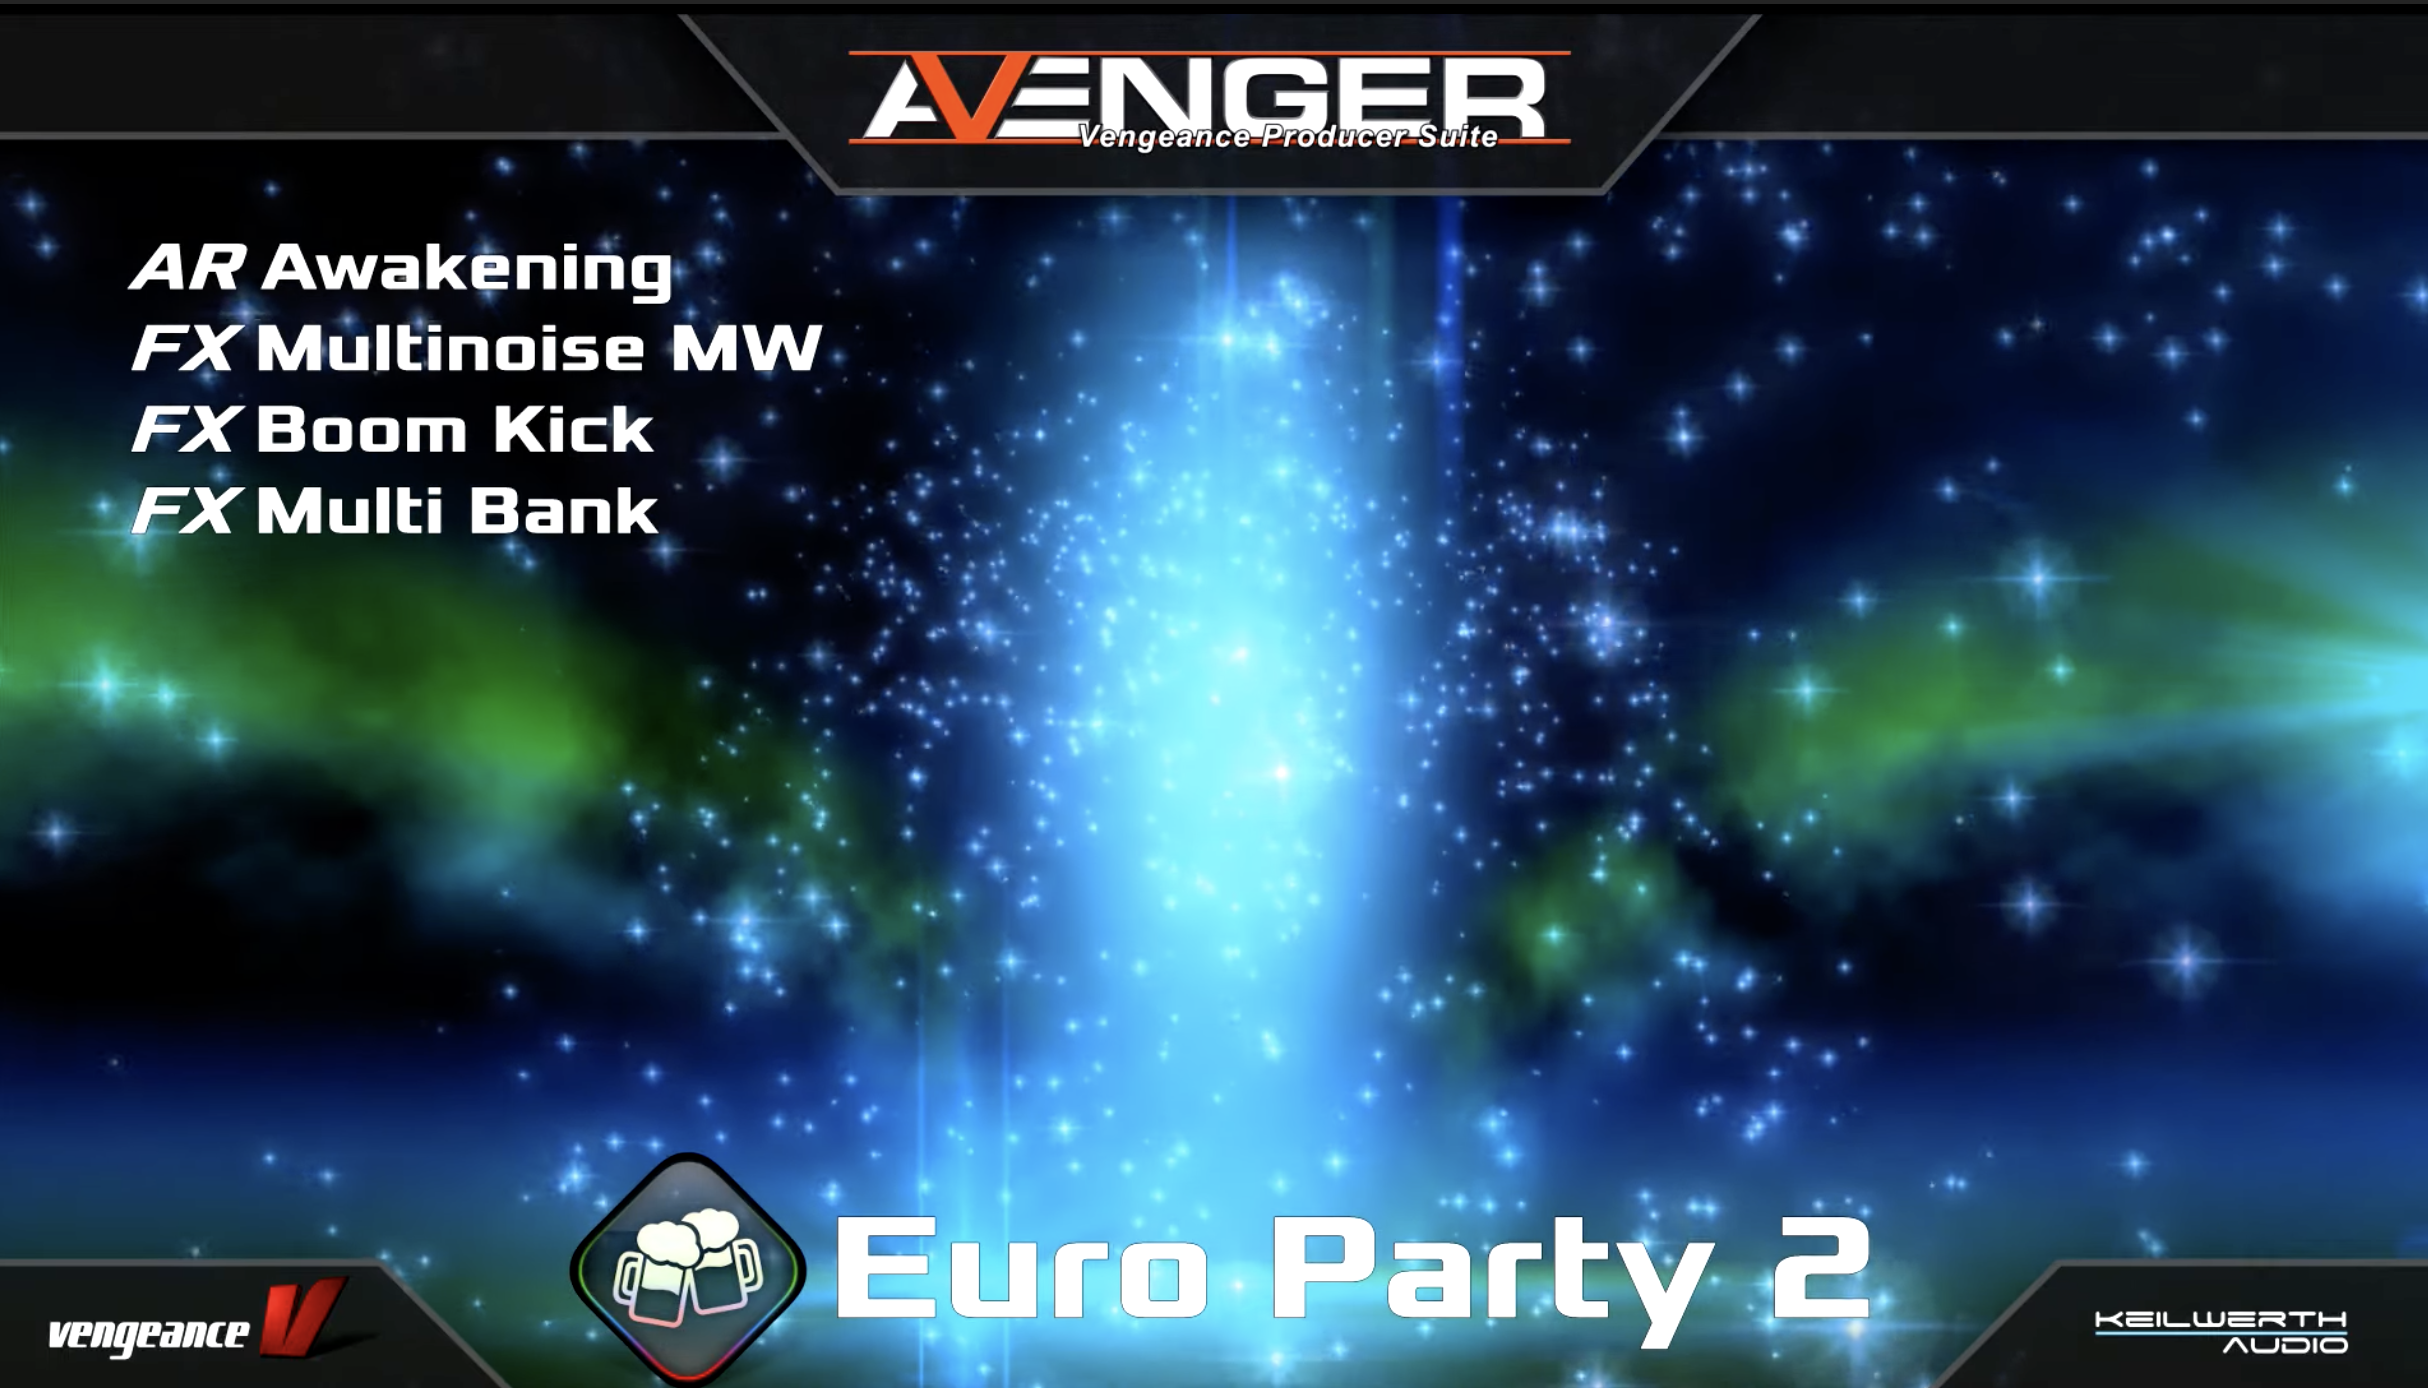 VPS Avenger Euro Party 2 XP: The Perfect Collection of Genre-Specific Sounds to Create Authentic German Schlager, Chart/Pop, Apres Ski, Carnival, and EDM/Dance Tracks